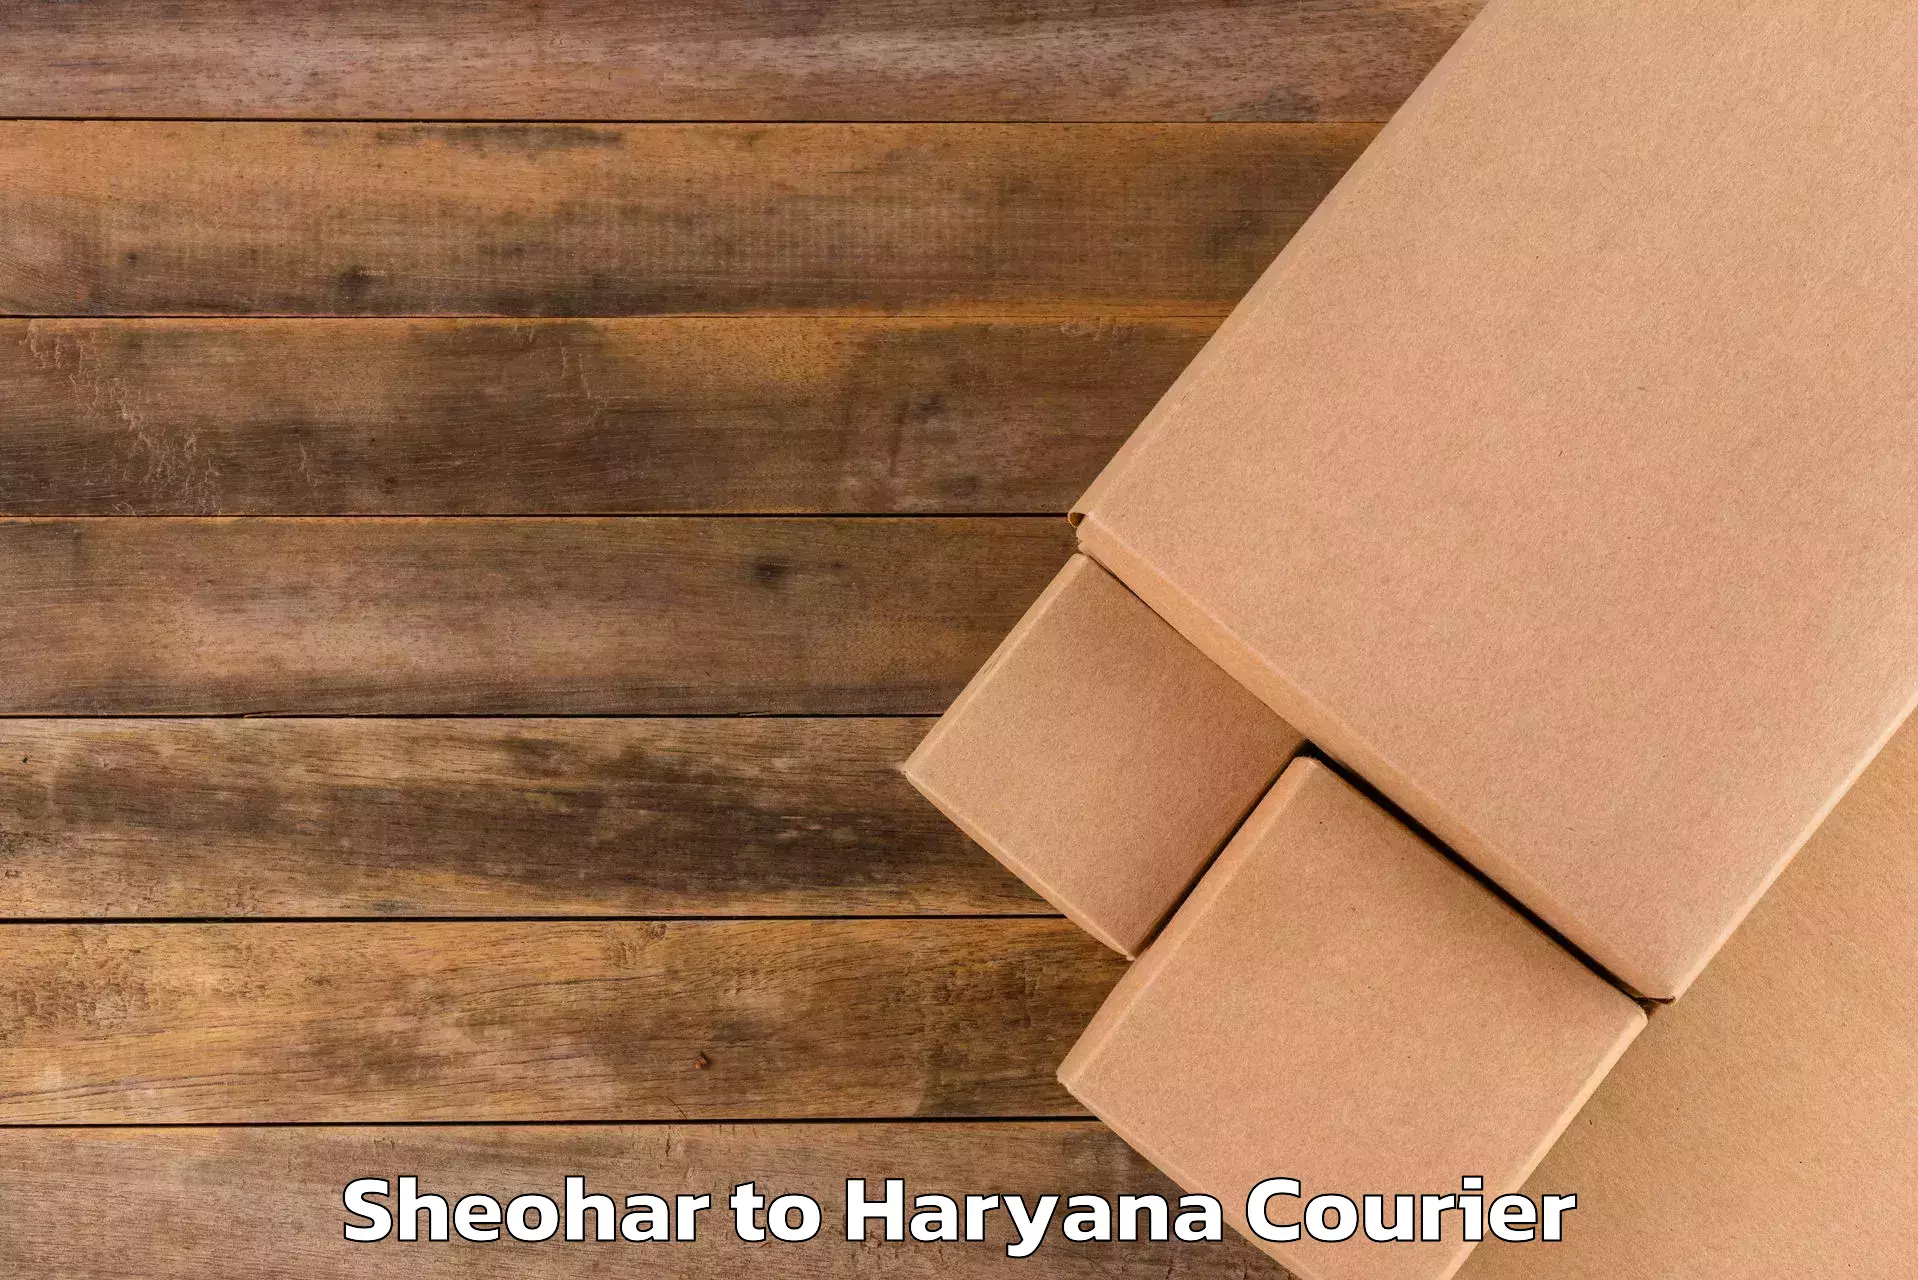 Instant baggage transport quote Sheohar to Faridabad